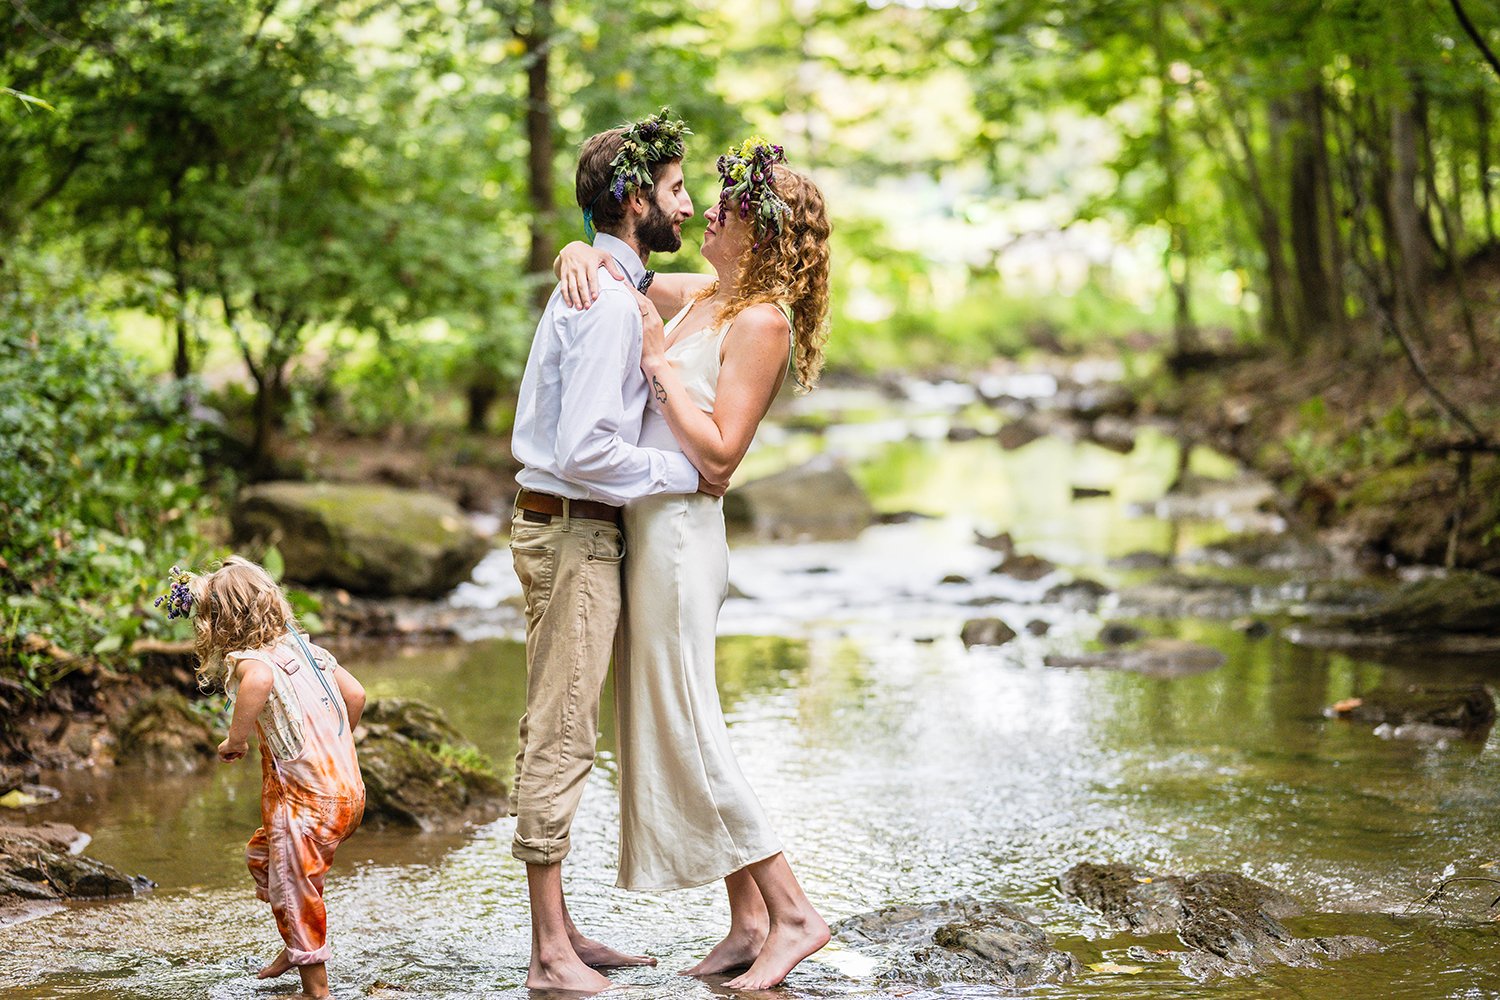 A wedding couple embrace and look lovingly into one another's arms while standing in a shallow creek under a canopy of trees as their daughter tip toes around them on their elopement day.